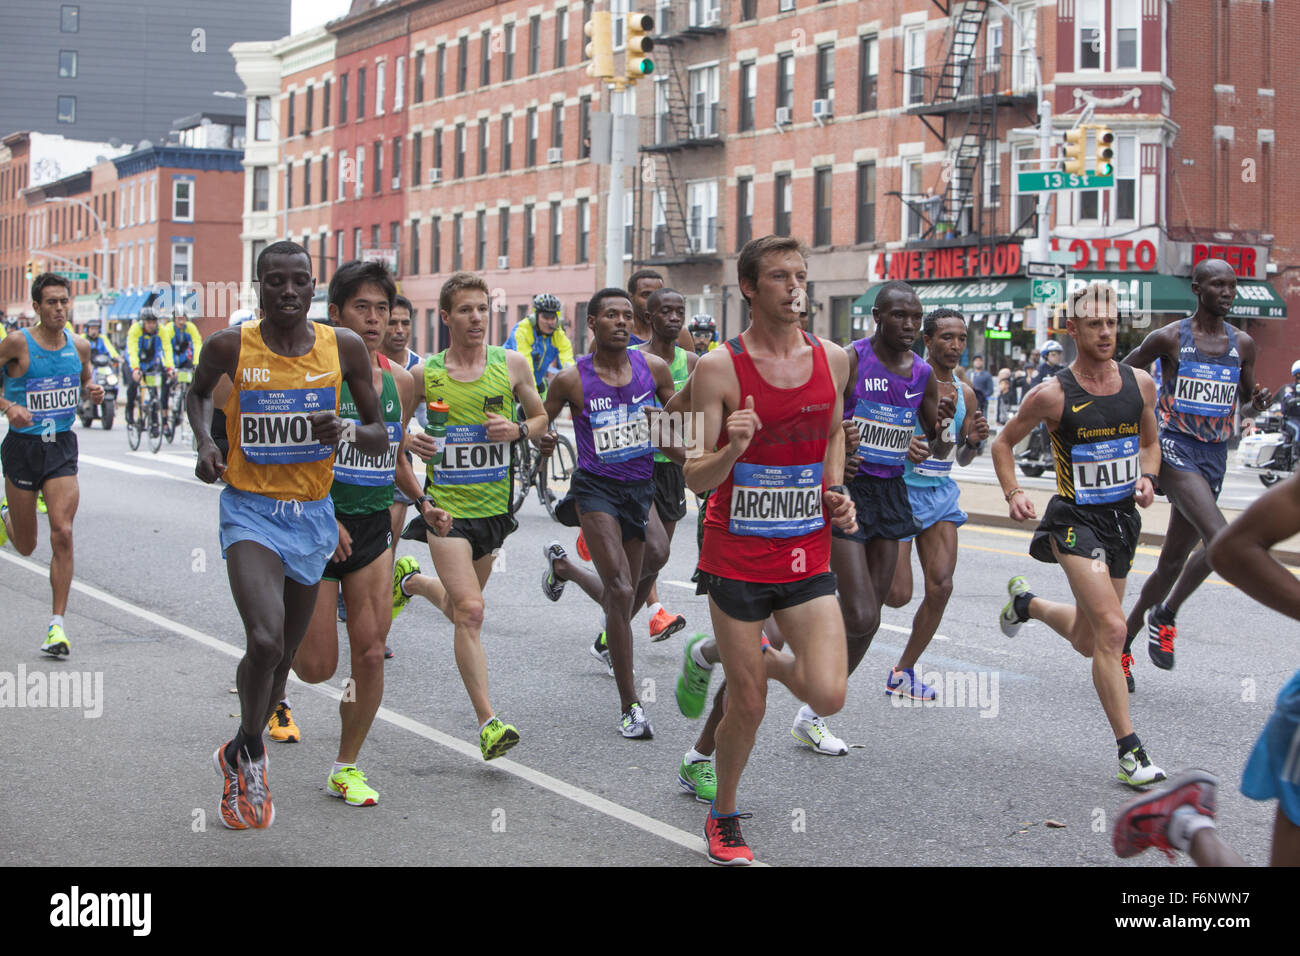 Front runners in the NYC Marathon 2015 along 4th Ave. in Brooklyn with Stanley Biwott (left) of Kenya the eventual winner. Stock Photo